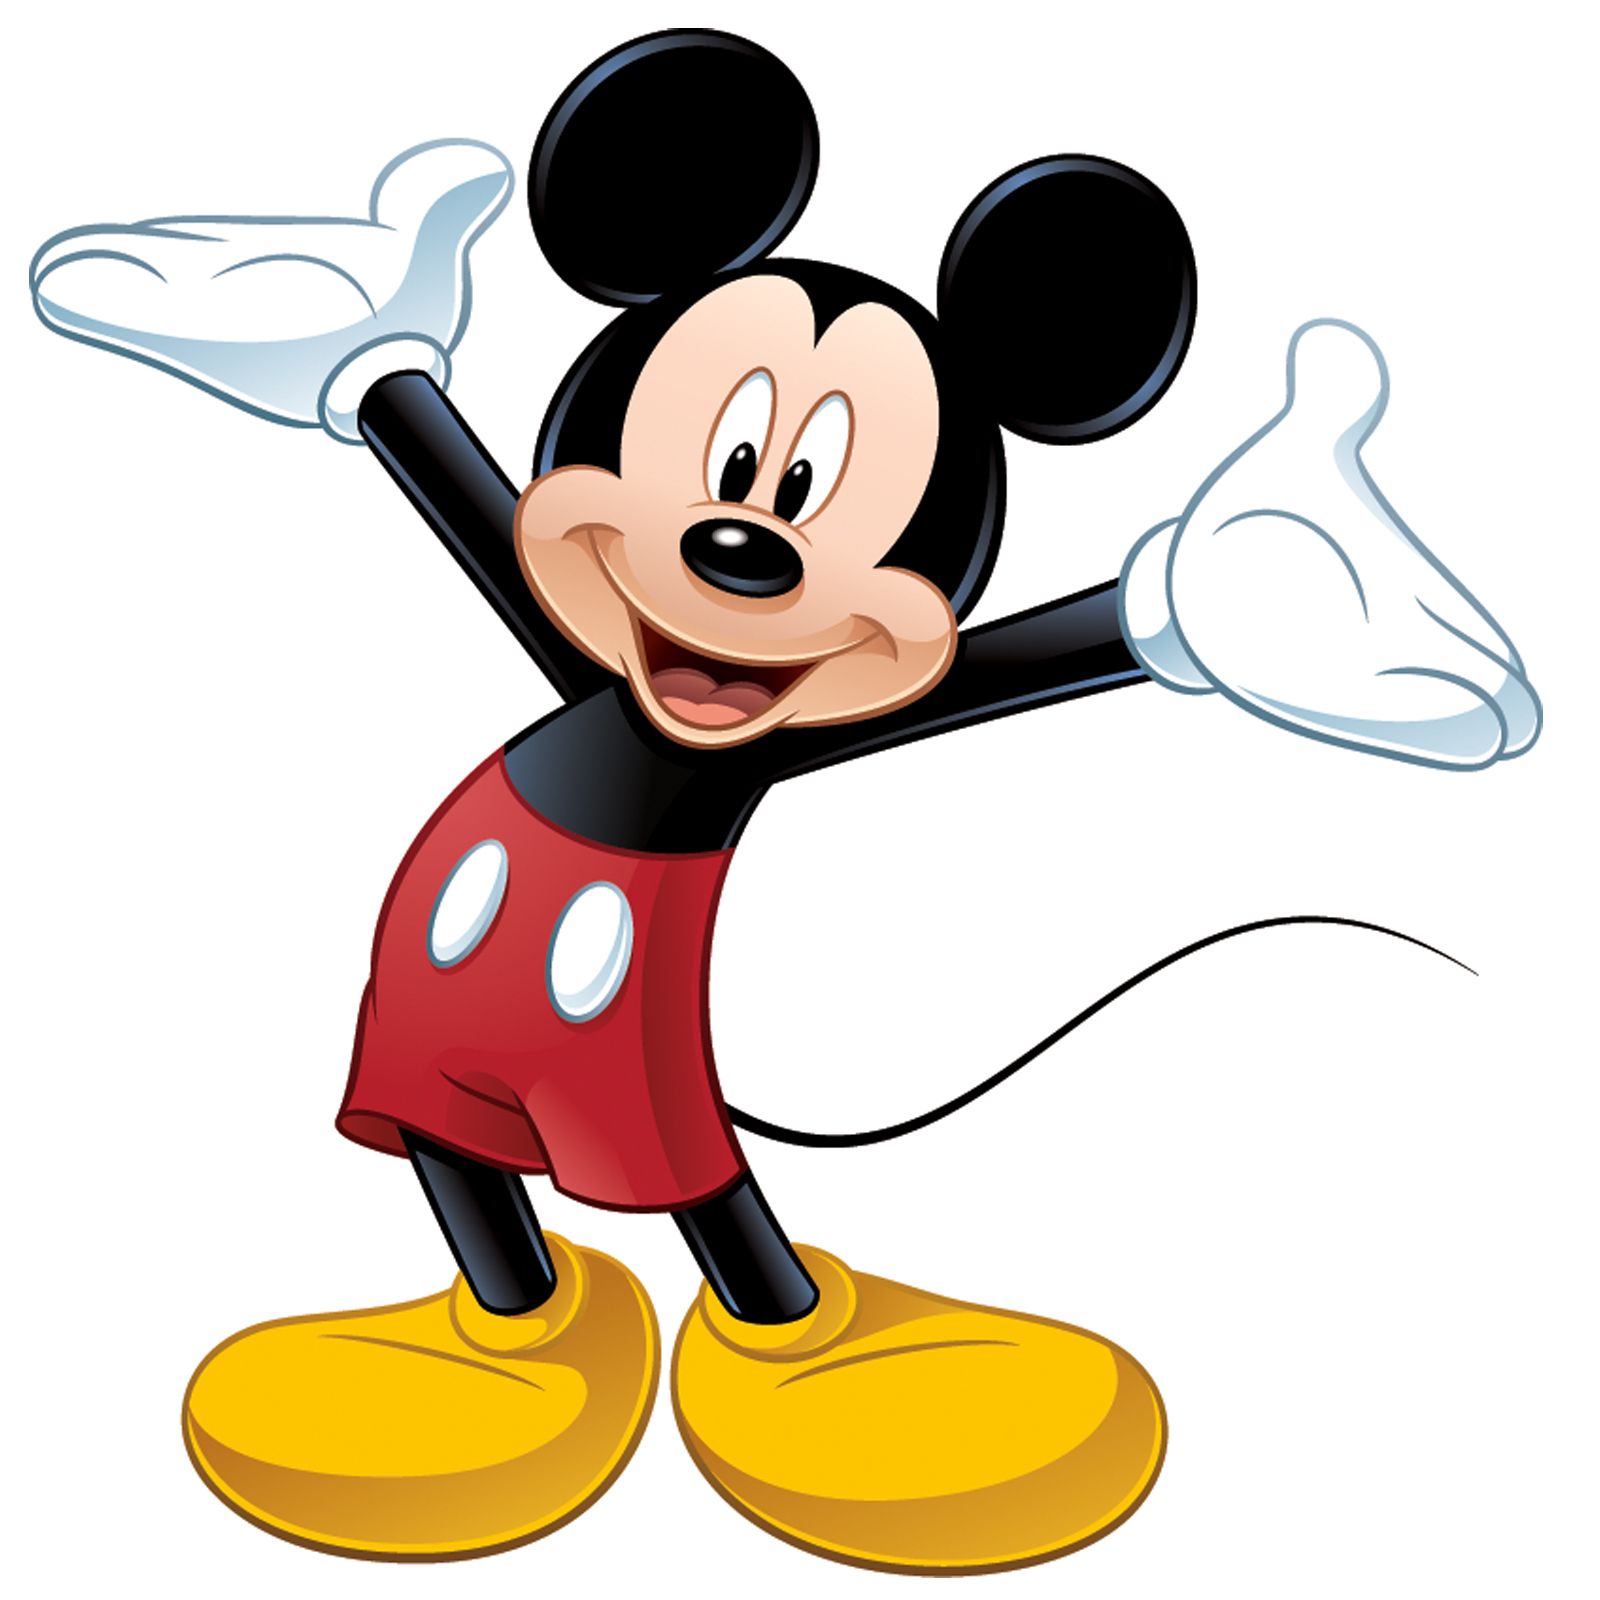 Disney Mickey Mouse Giant Wall Decal